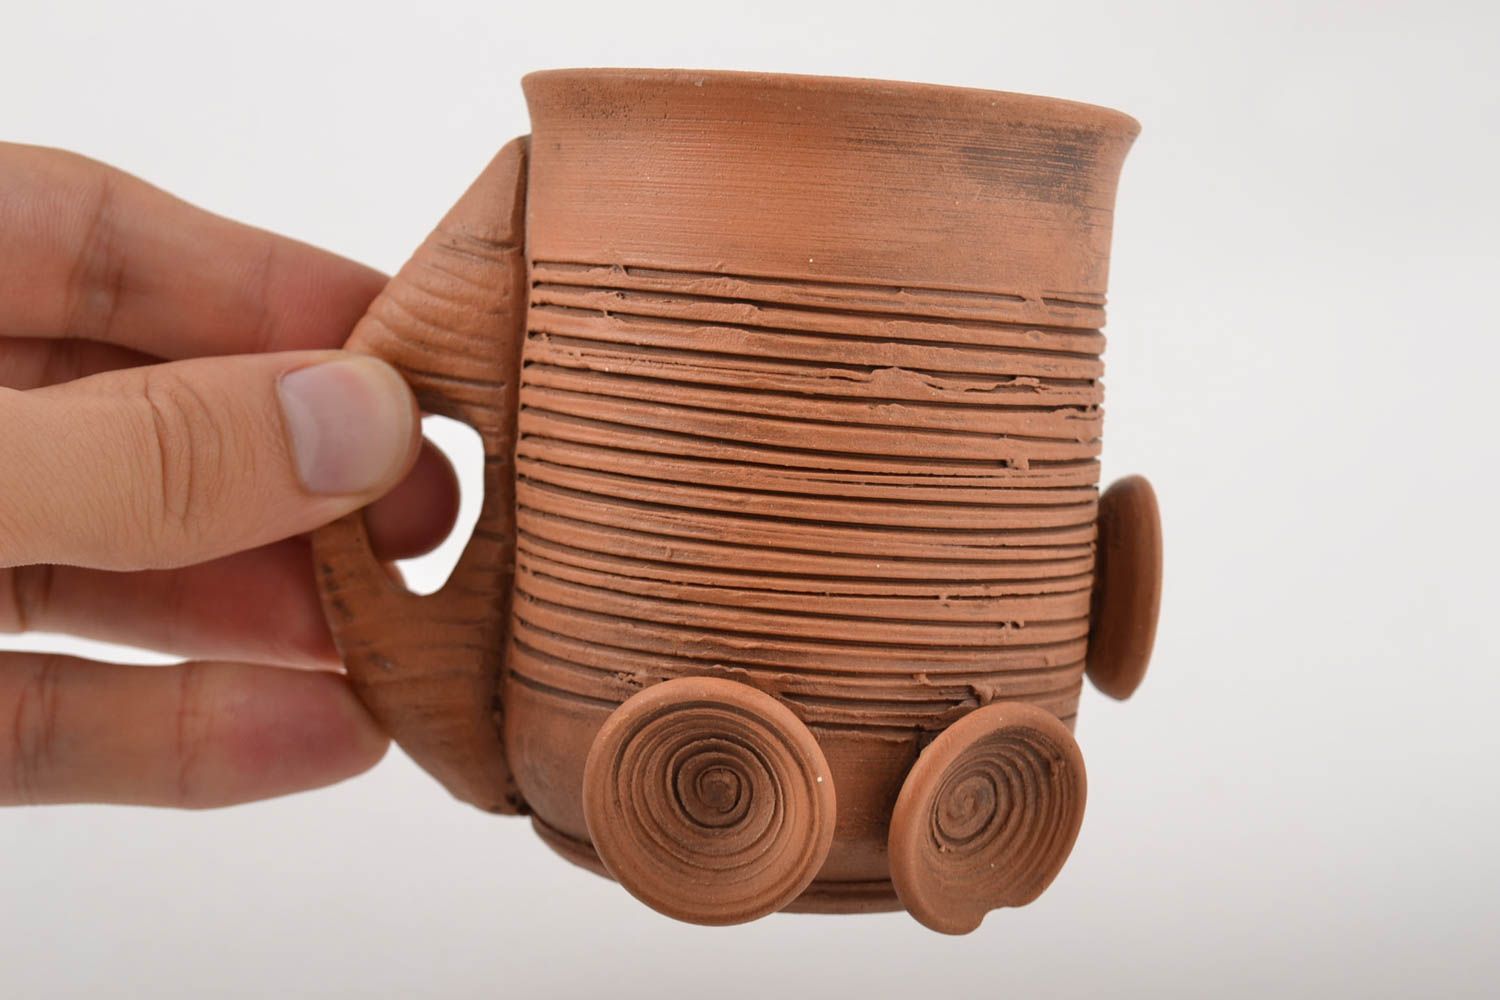 Art clay cup for tea or coffee 6 oz in light brown color and handle photo 4